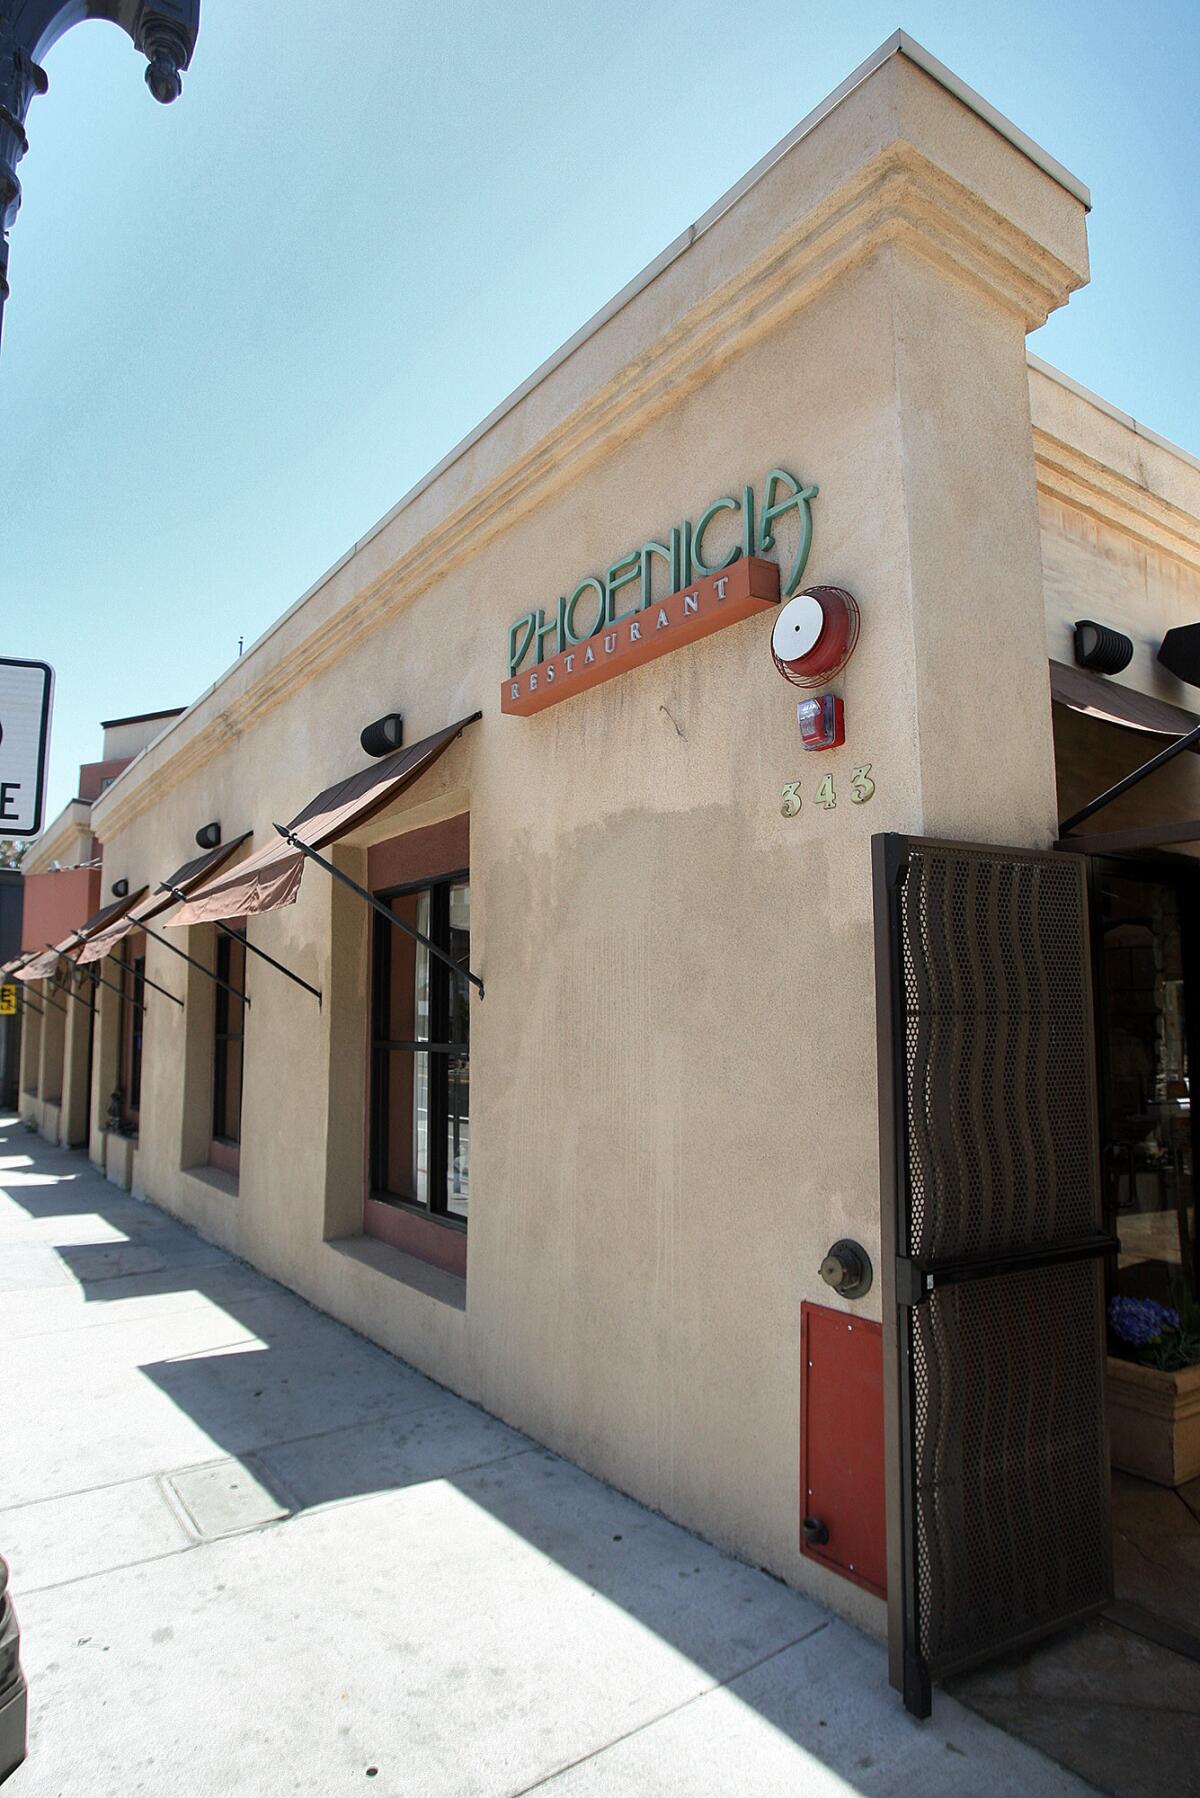 Phoenicia Restaurant in Glendale, owned by a city commissioner, is at the center of a controversy over permitted parking with residents on Lexington Drive.